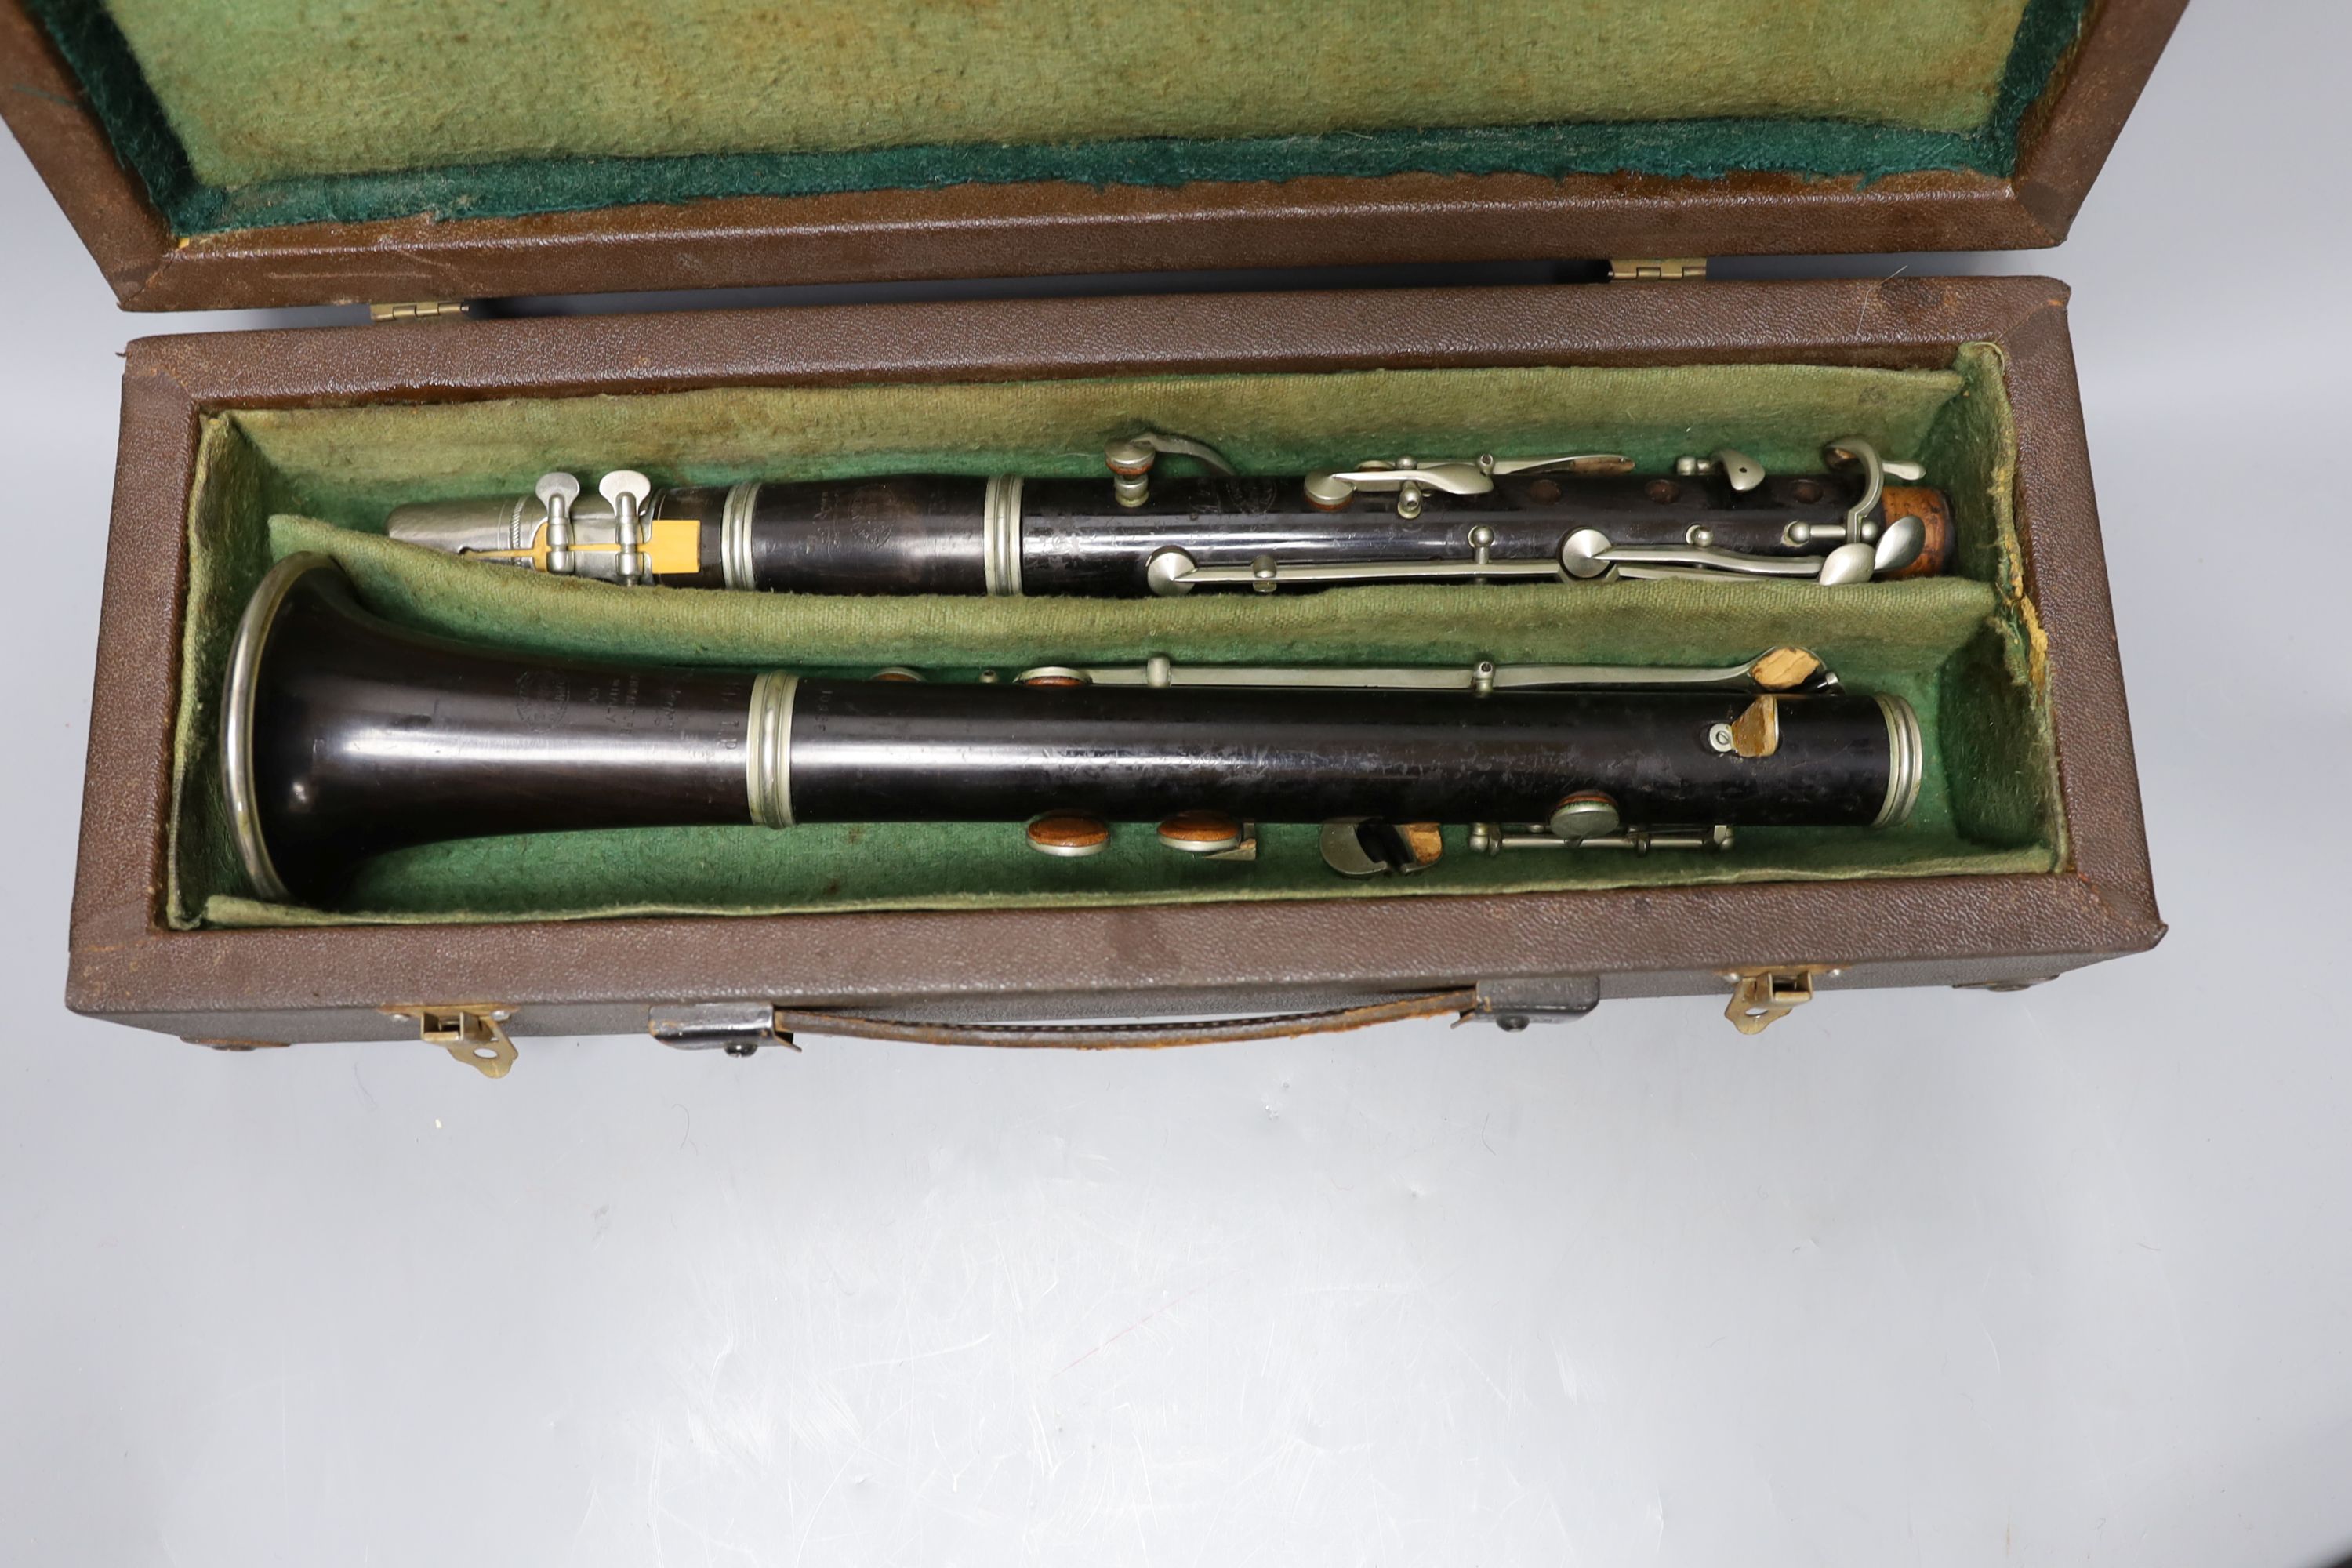 A ‘Superior Class’ Hawkes & Son clarinet and a cased Rampone and Cazzani ‘Judson’ ’ clarinet,67 cm - Image 3 of 10